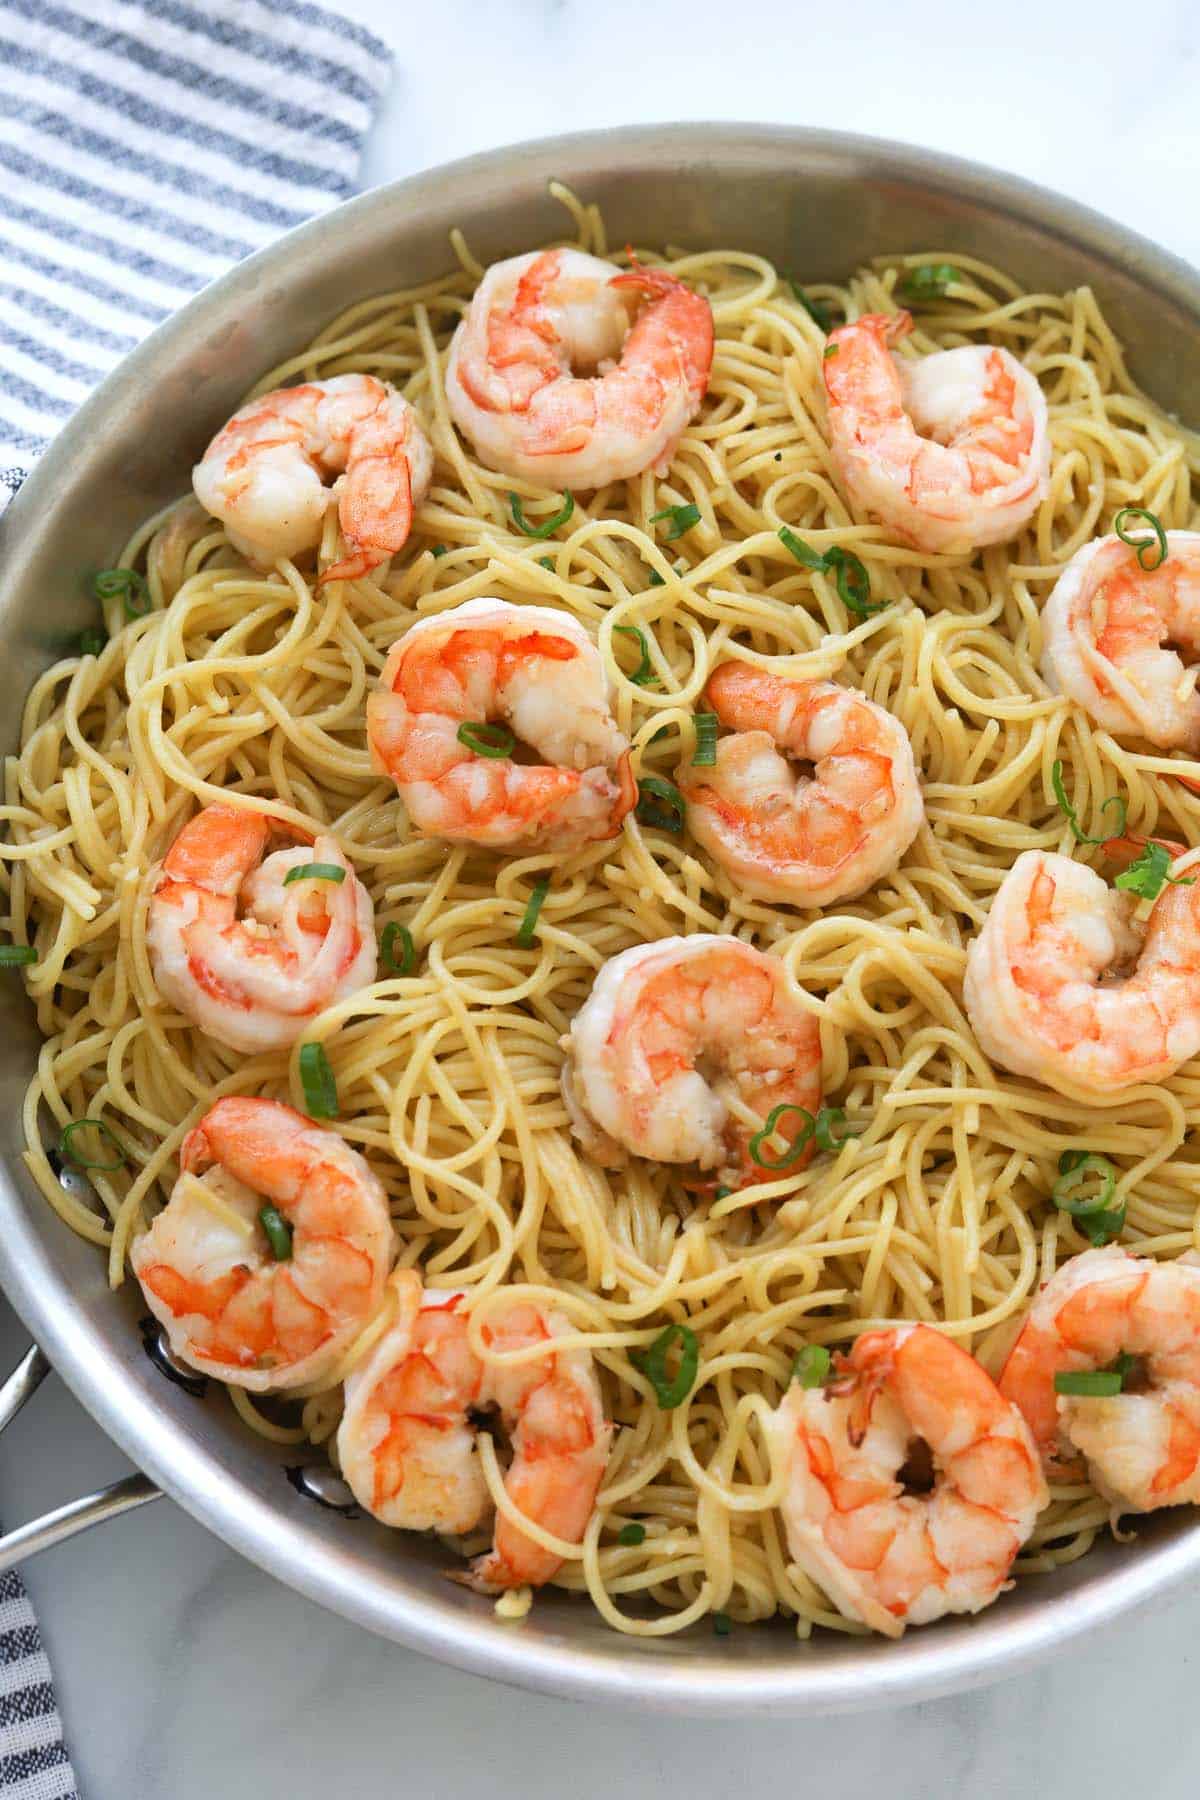 Noodles with shrimp and green onion garnish in pan.